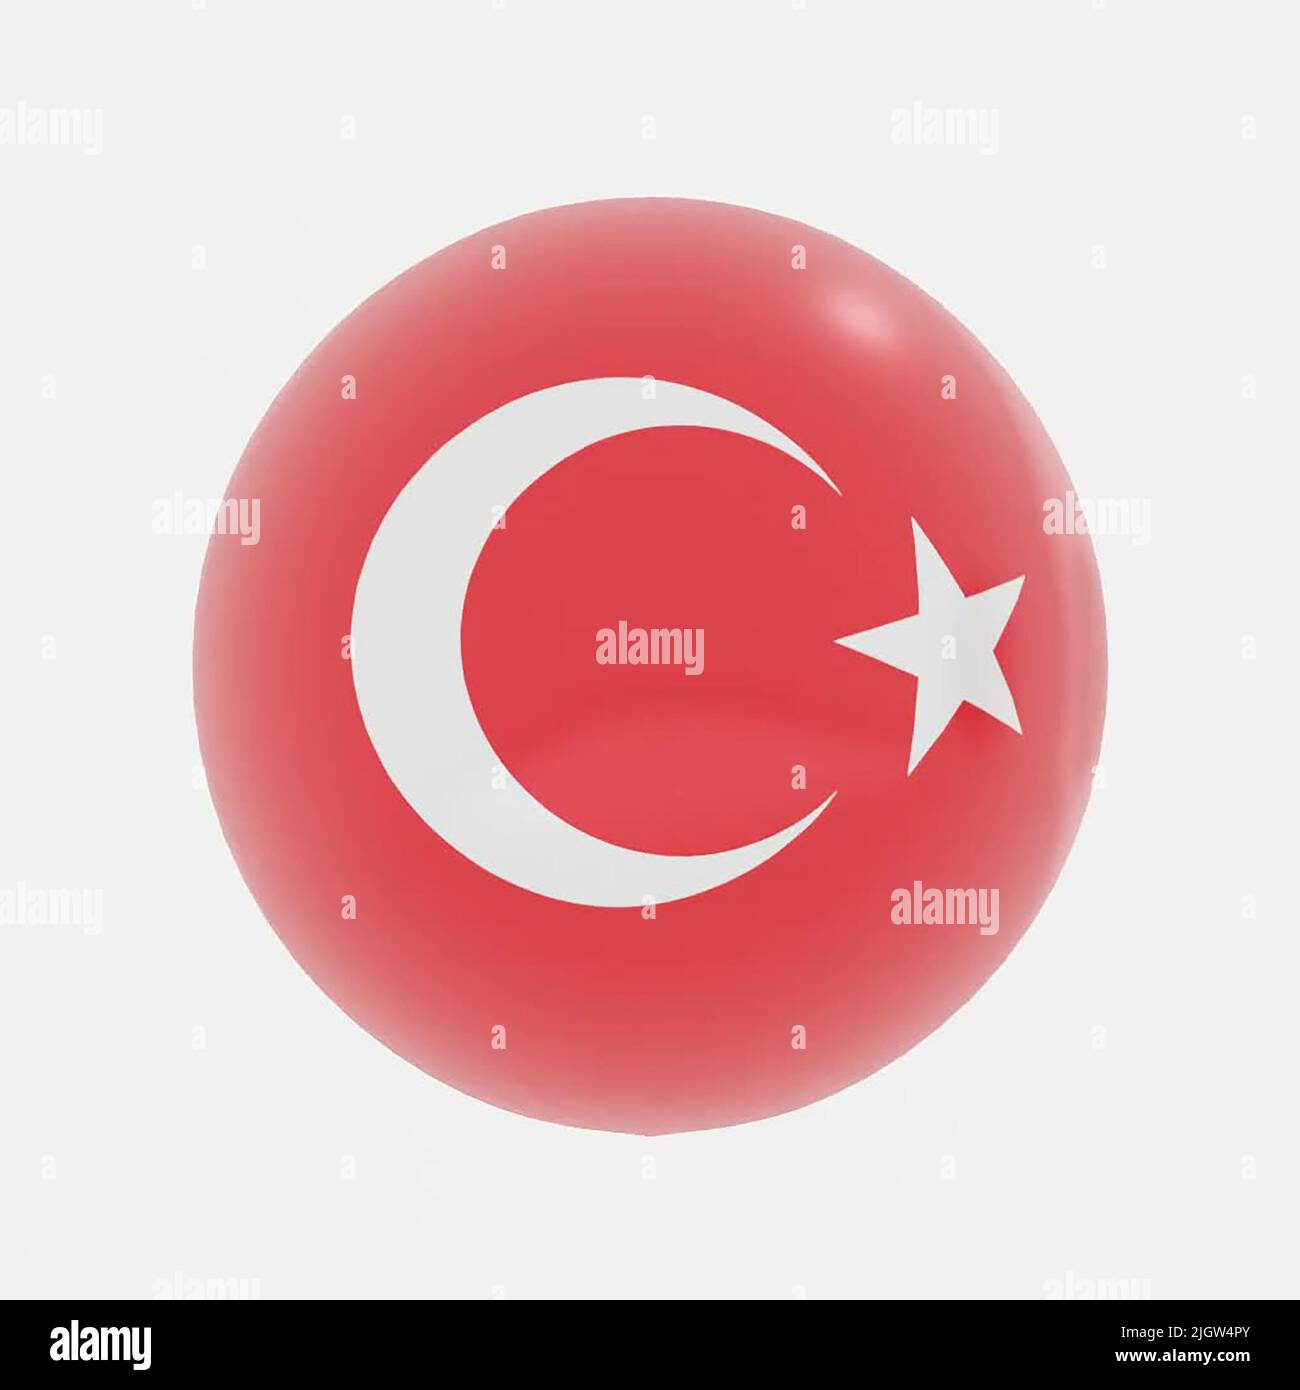 3d render of globe in Turkey countries flag for icon or symbol. Stock Photo